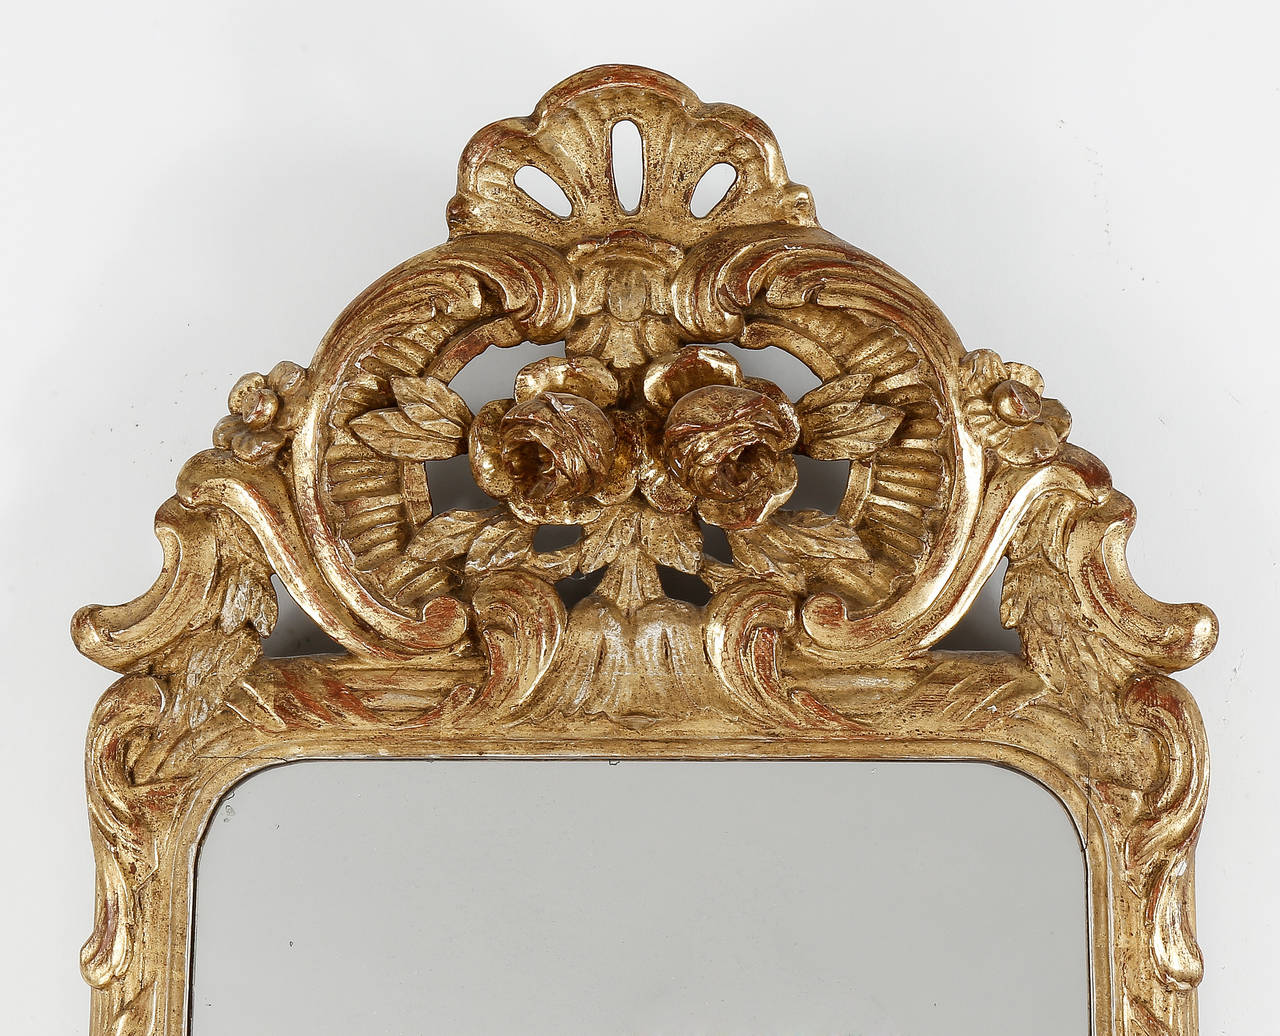 A fine Gustavian Period giltwood pier mirror, the cresting and apron with elaborate carving, having two mirror plates in the traditional manner.